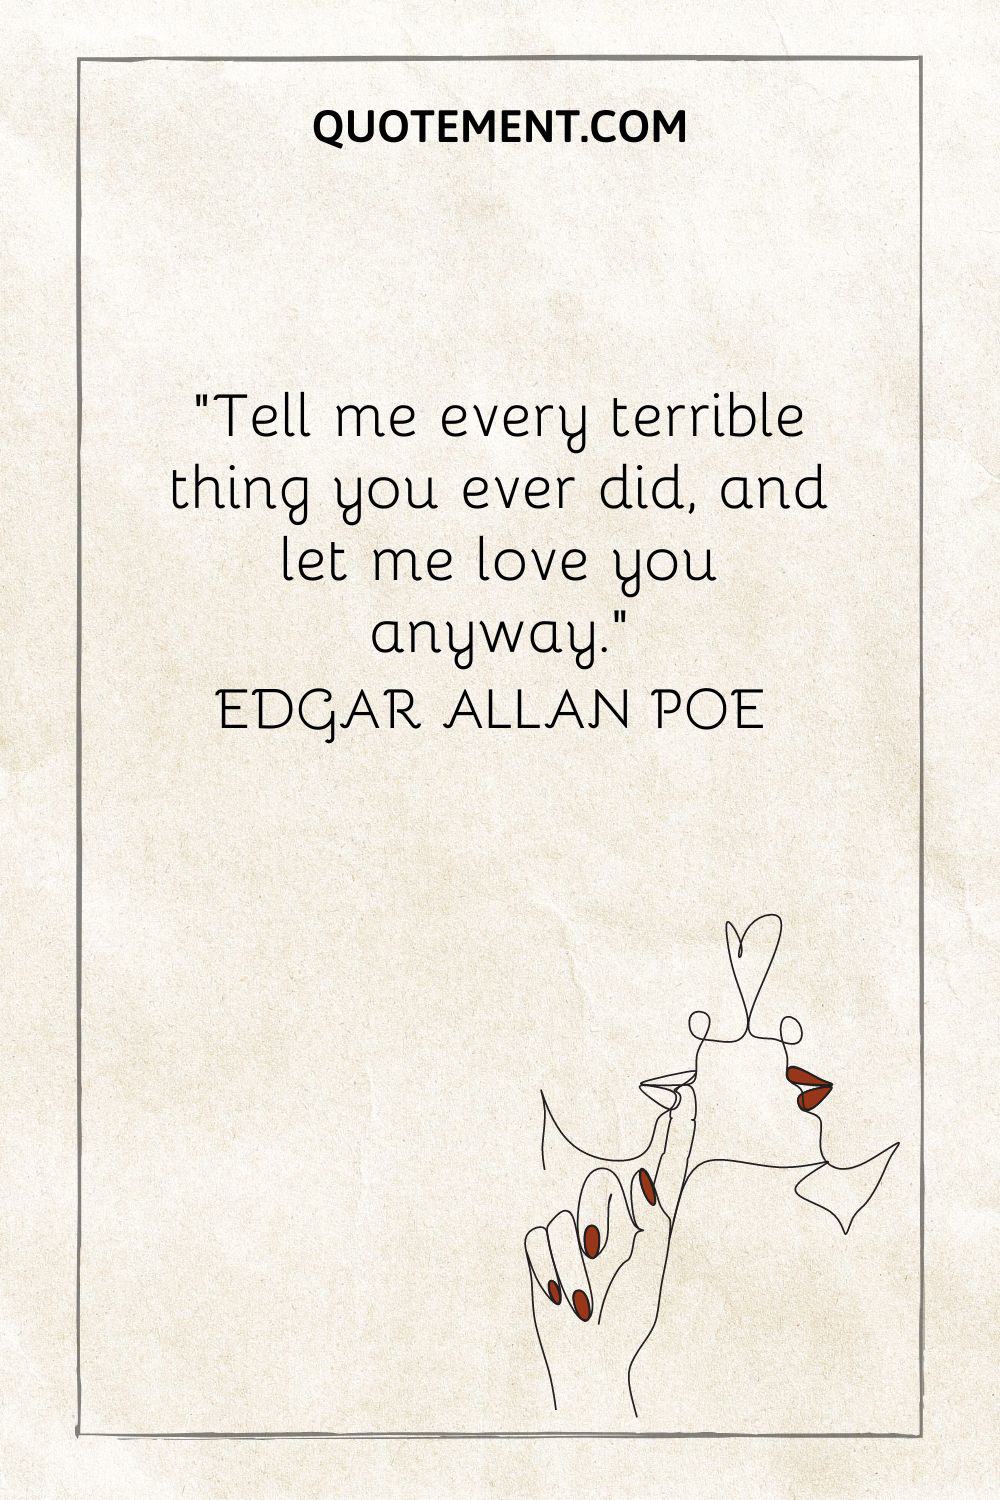 illustration of two people representing edgar allan poe love quote